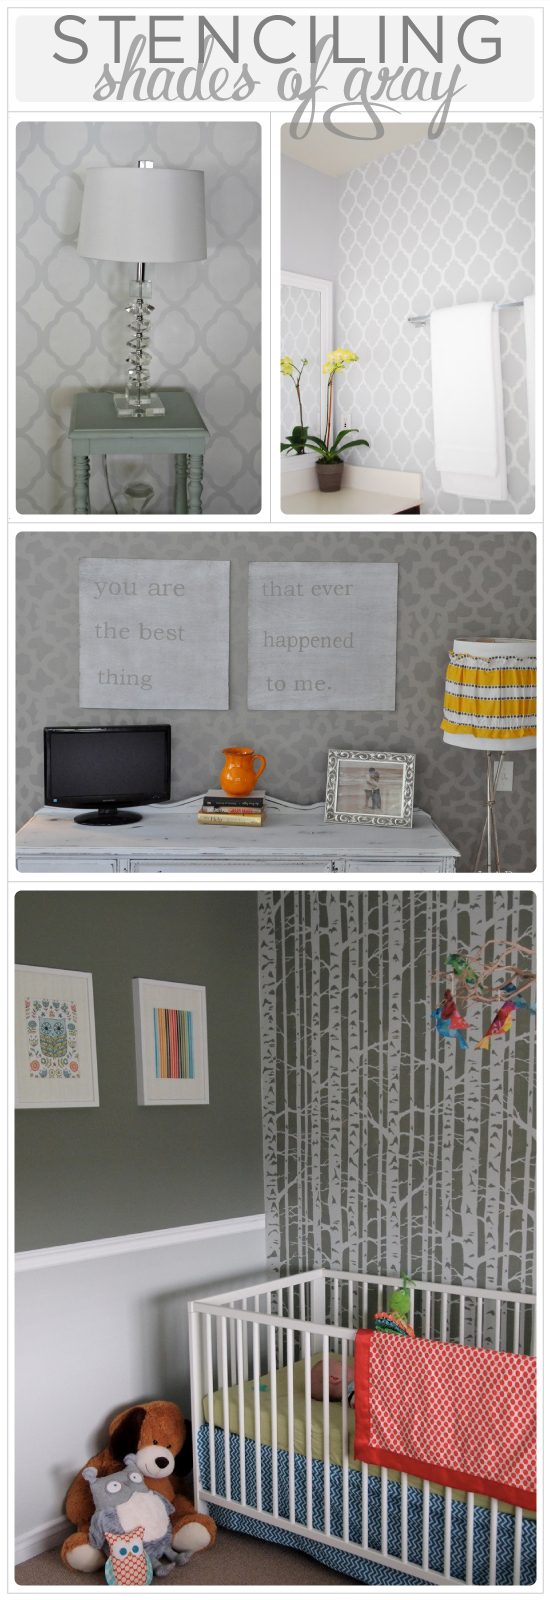 Don't be afraid of using gray when painting with Cutting Edge Stencils!